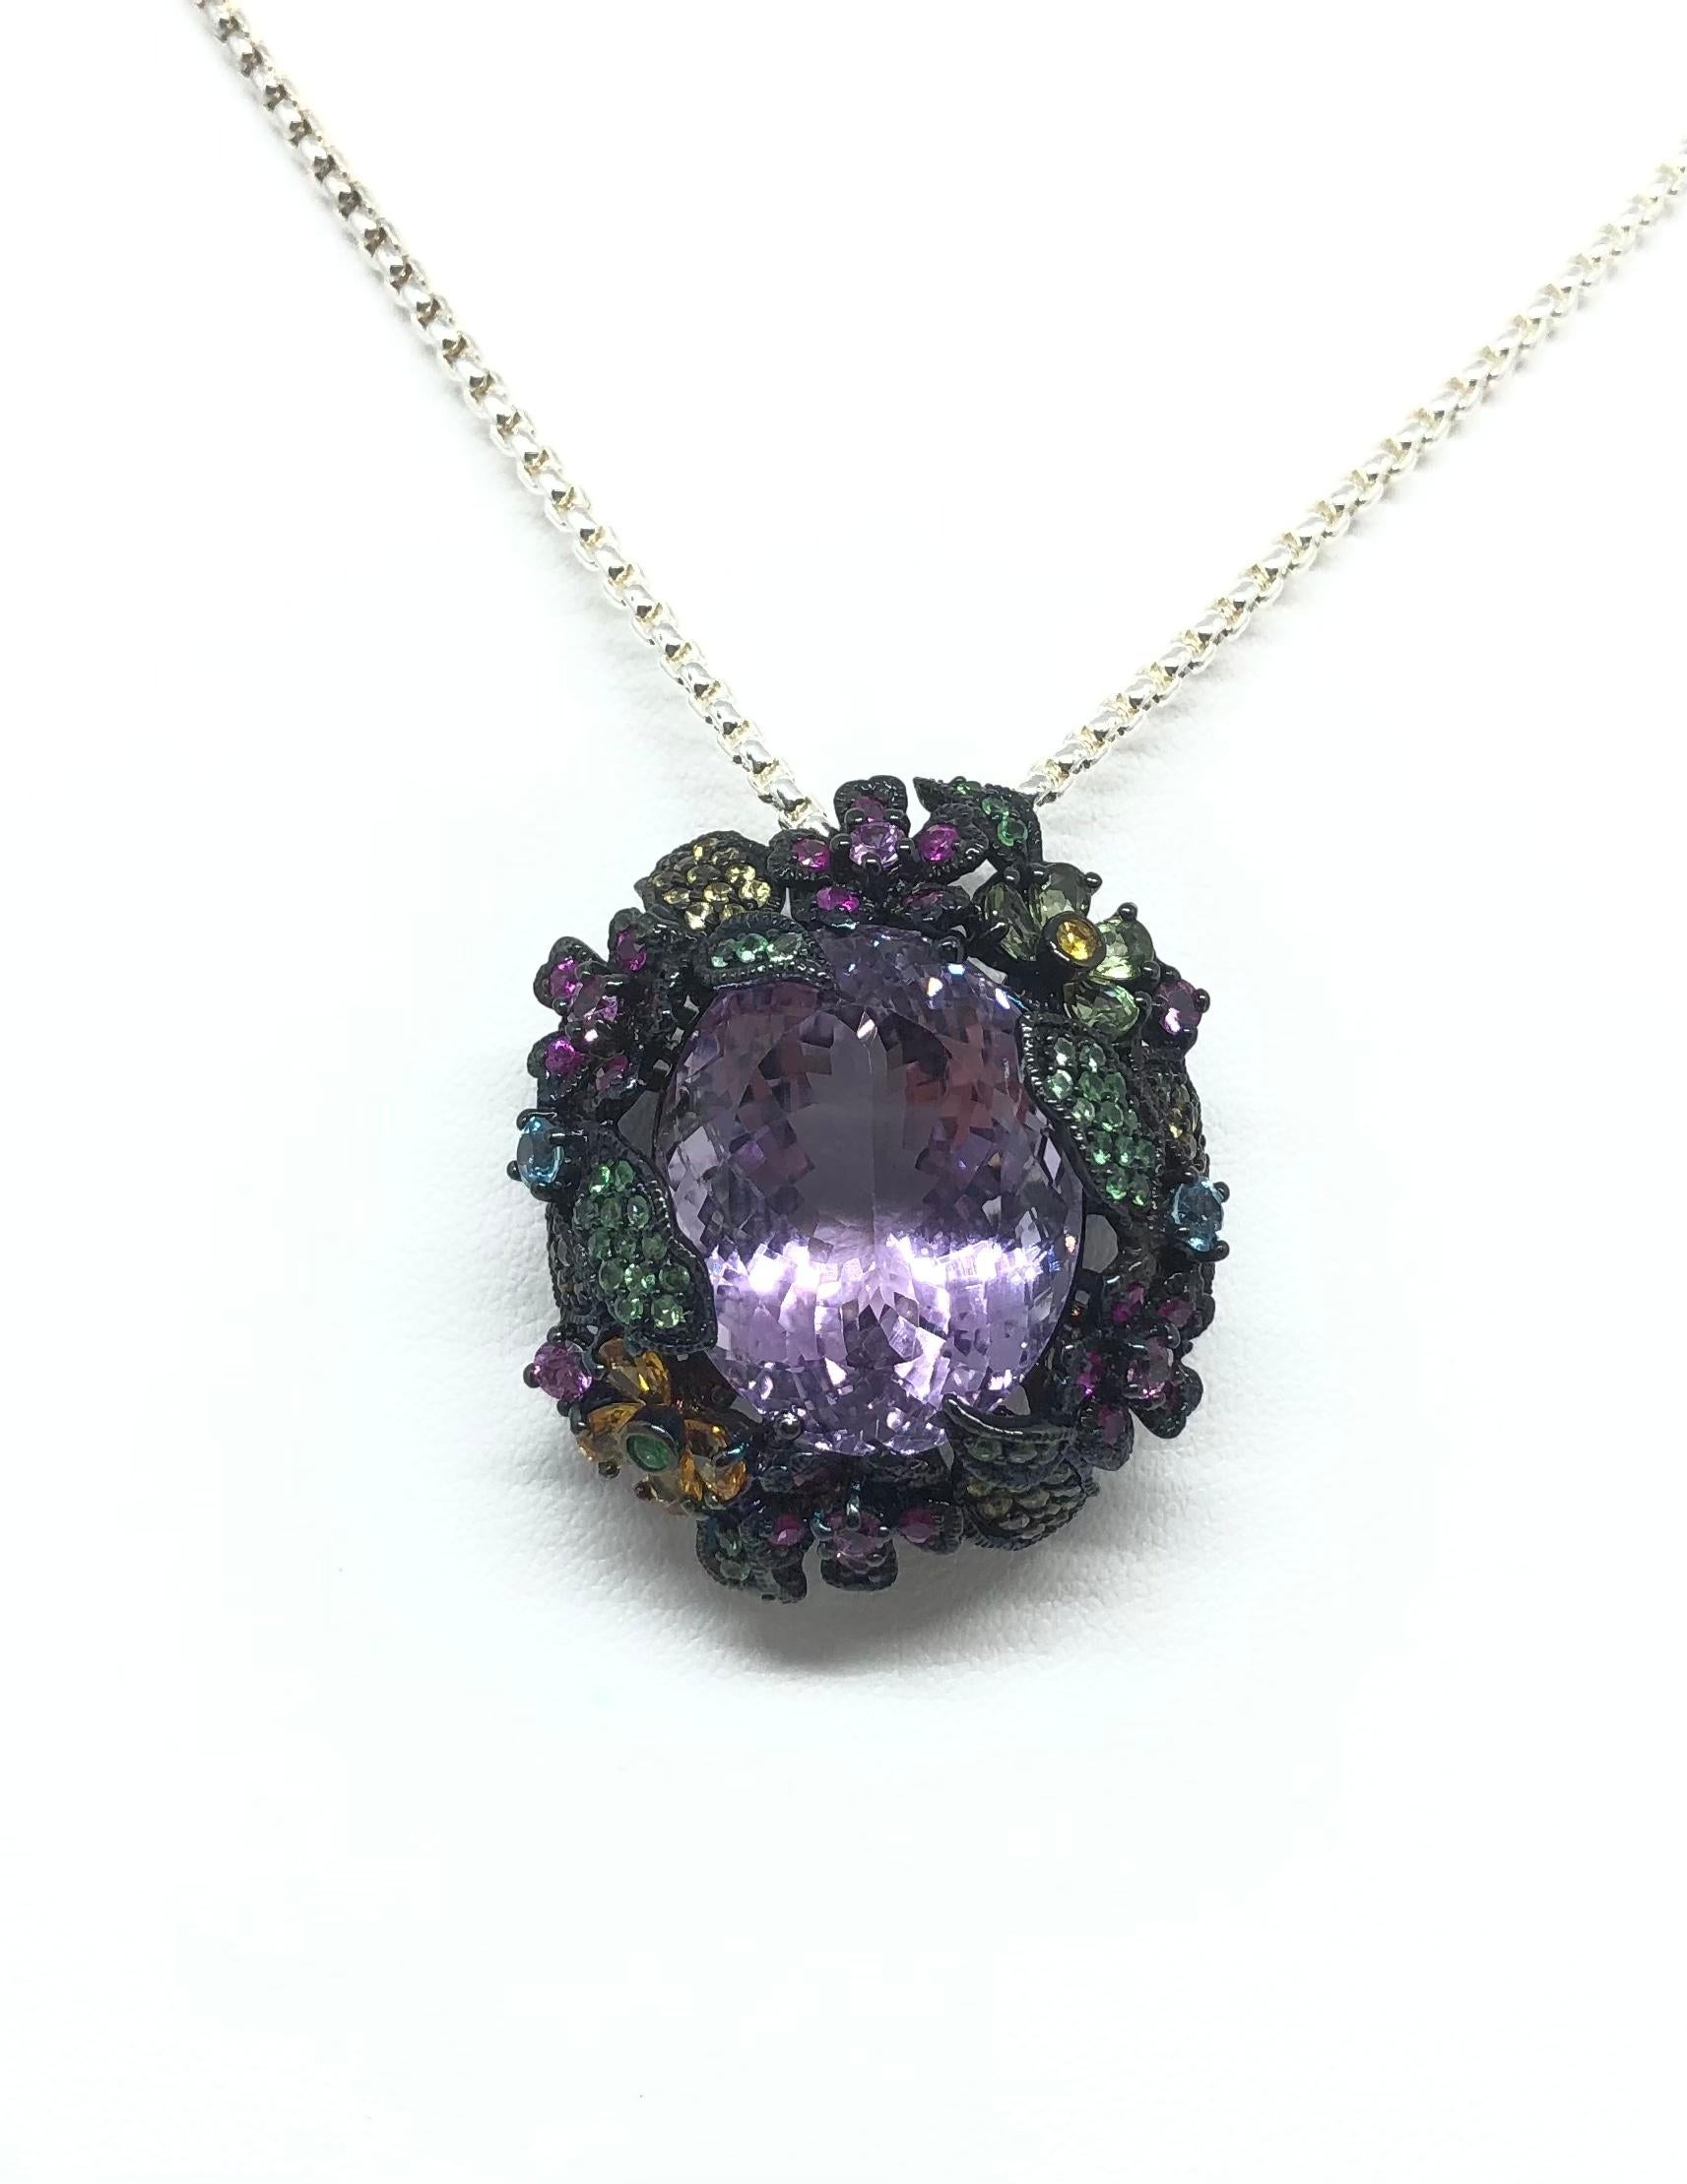 Amethyst, Multi-color Sapphire and Tsavorite Pendant set in Silver Settings
(chain not included)

Width: 3.7 cm 
Length: 3.3 cm
Total Weight: 18.29  grams

*Please note that the silver setting is plated with rhodium to promote shine and help prevent